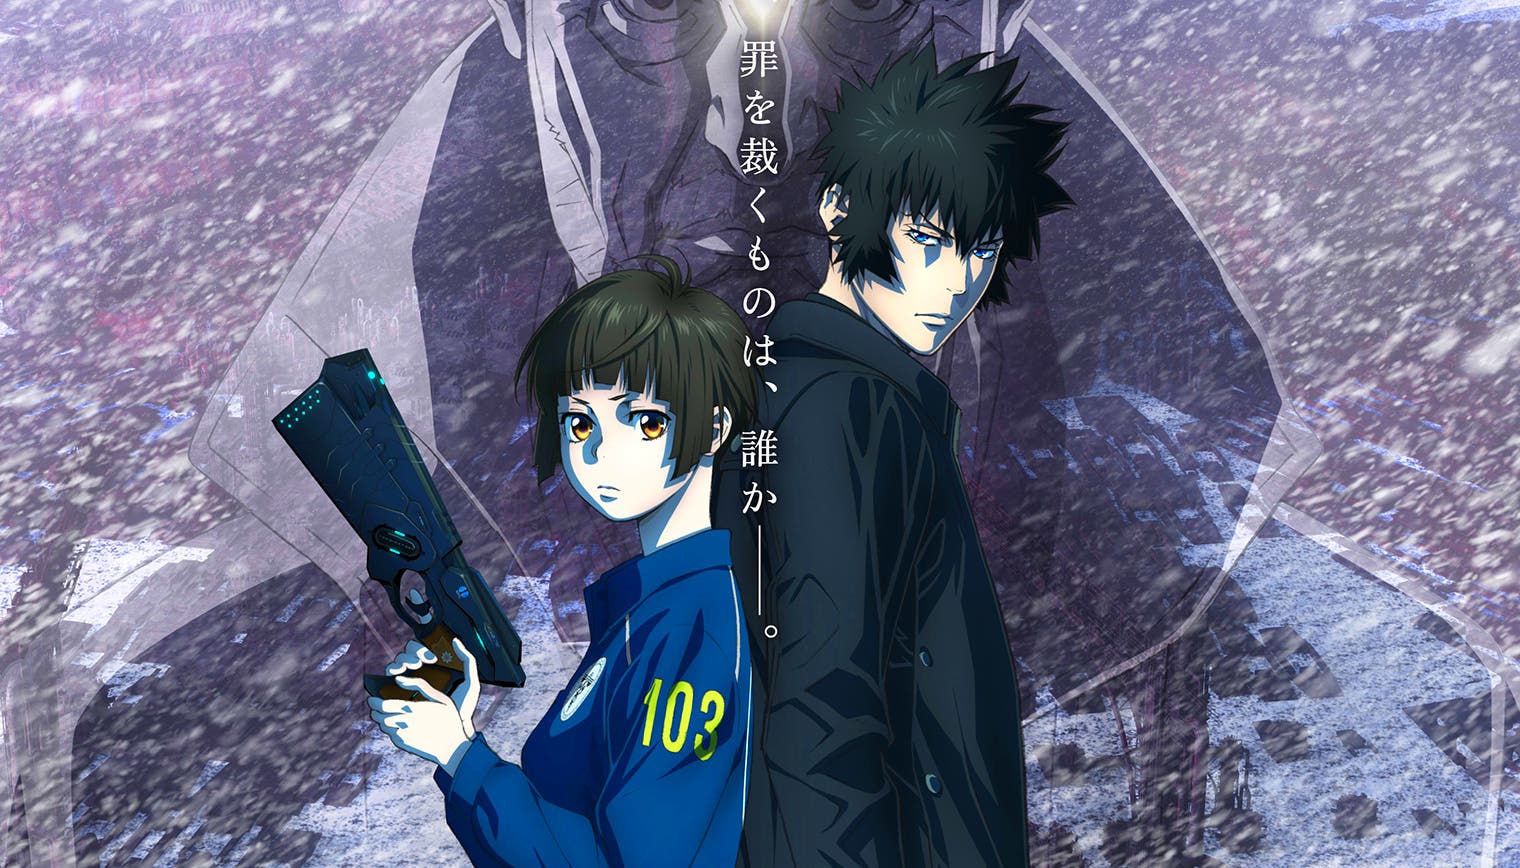 Psycho-Pass Providence is preparing for its theatrical release with a second trailer